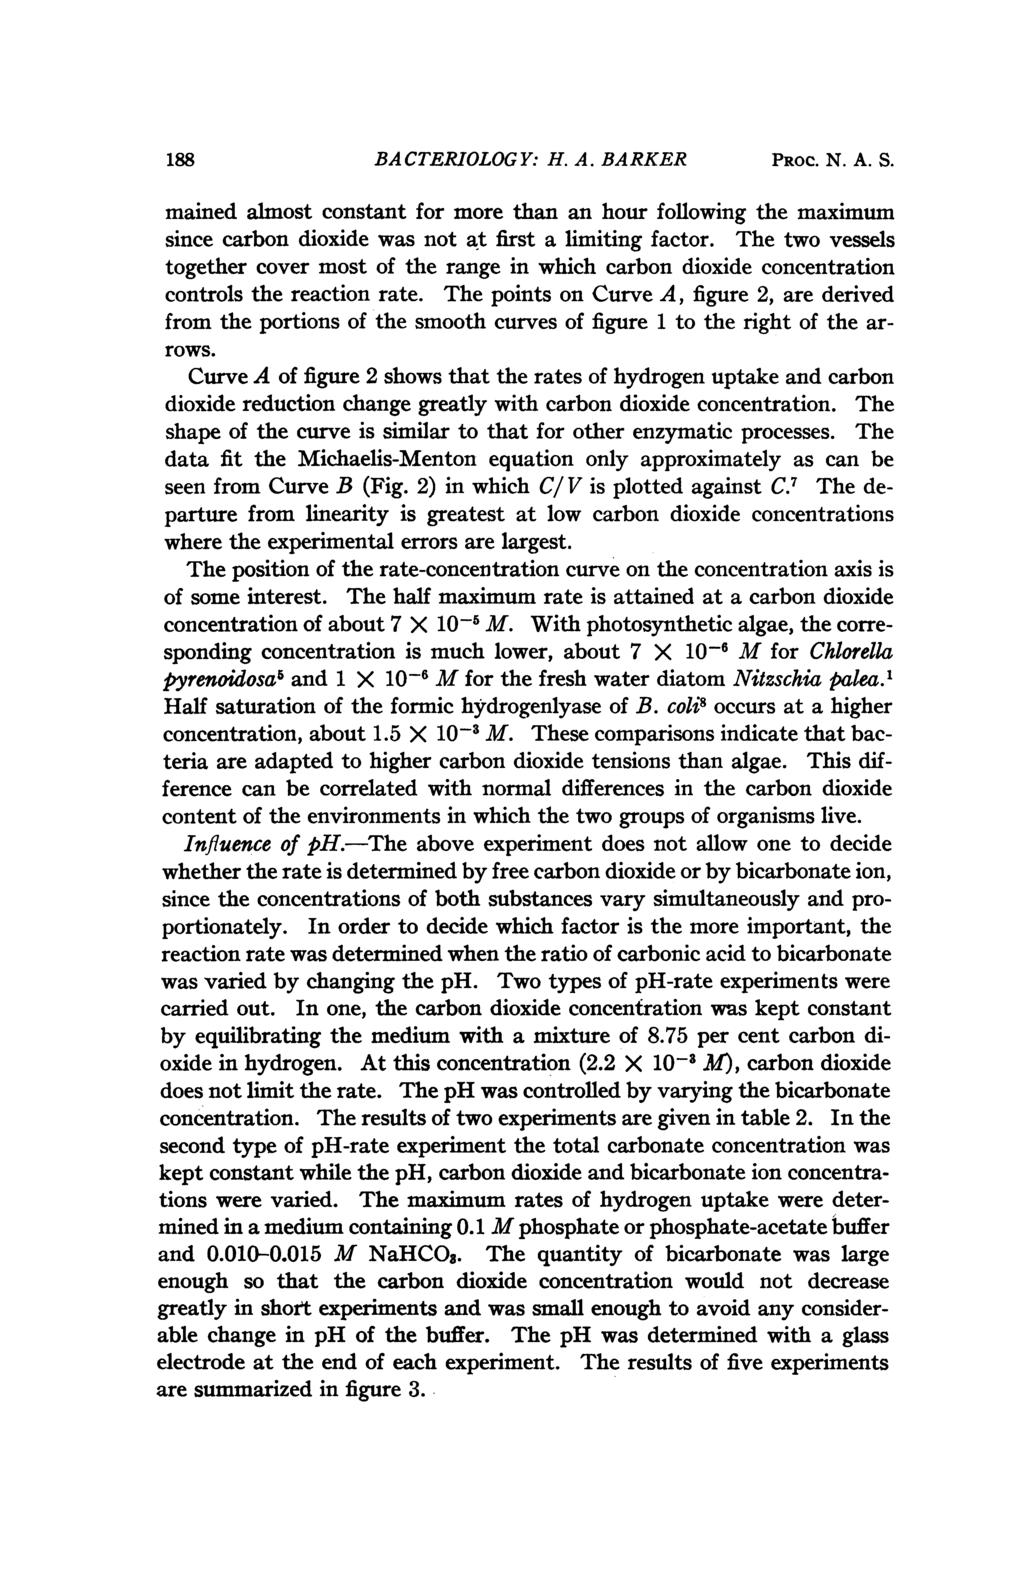 188 BACTERIOLOGY: H. A. BARKER PROC. N. A. S. mained almost constant for more than an hour following the maximum since carbon dioxide was not at first a limiting factor.